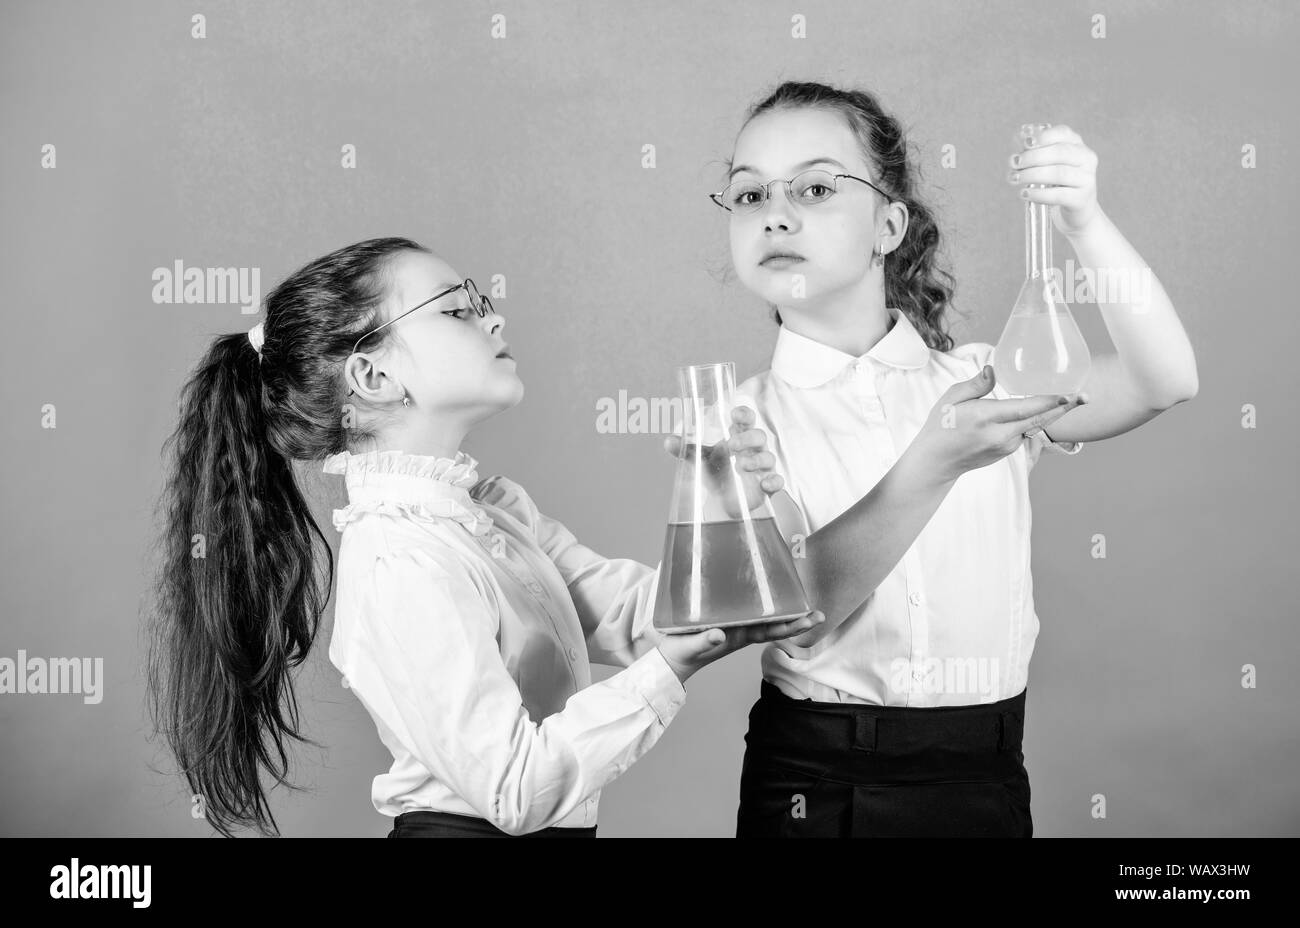 children study chemistry lab. back to school. biology education. little smart girls with testing flask. school kid scientist studying science. Bright minds at work. laboratory work. school work place. Stock Photo